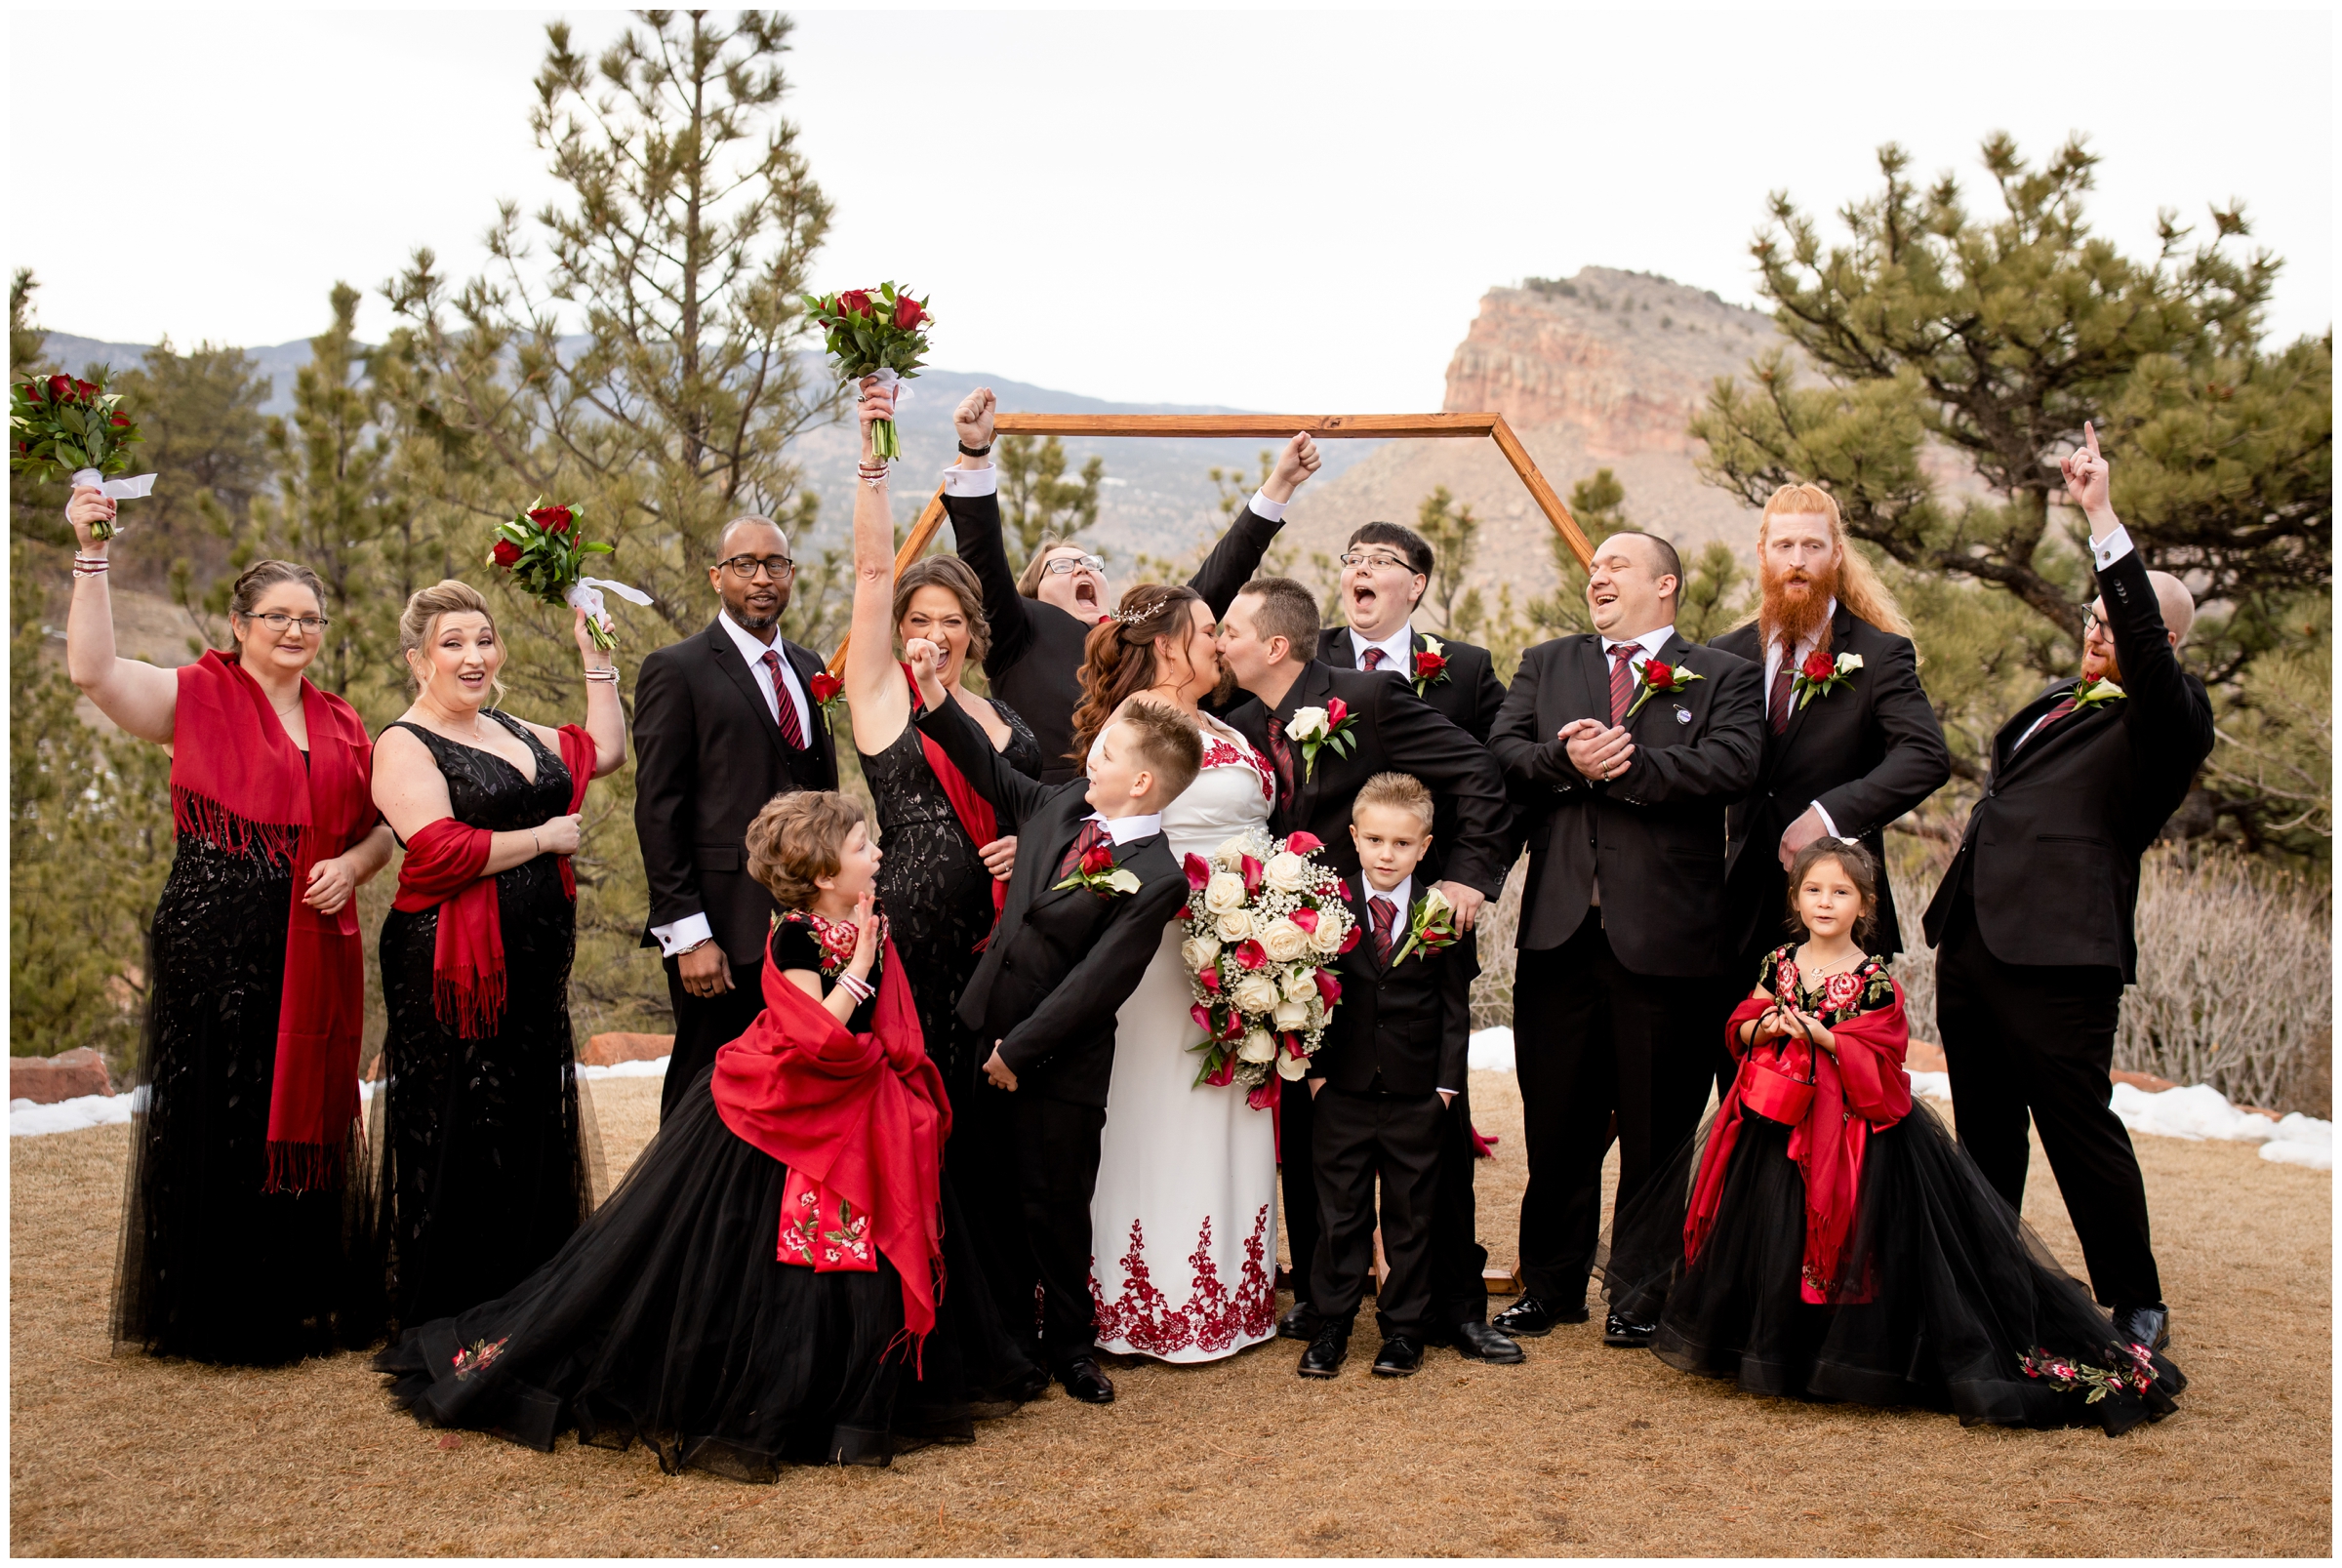 wedding party in red and black cheering for bride and groom at Lionscrest Manor Colorado winter wedding photos 